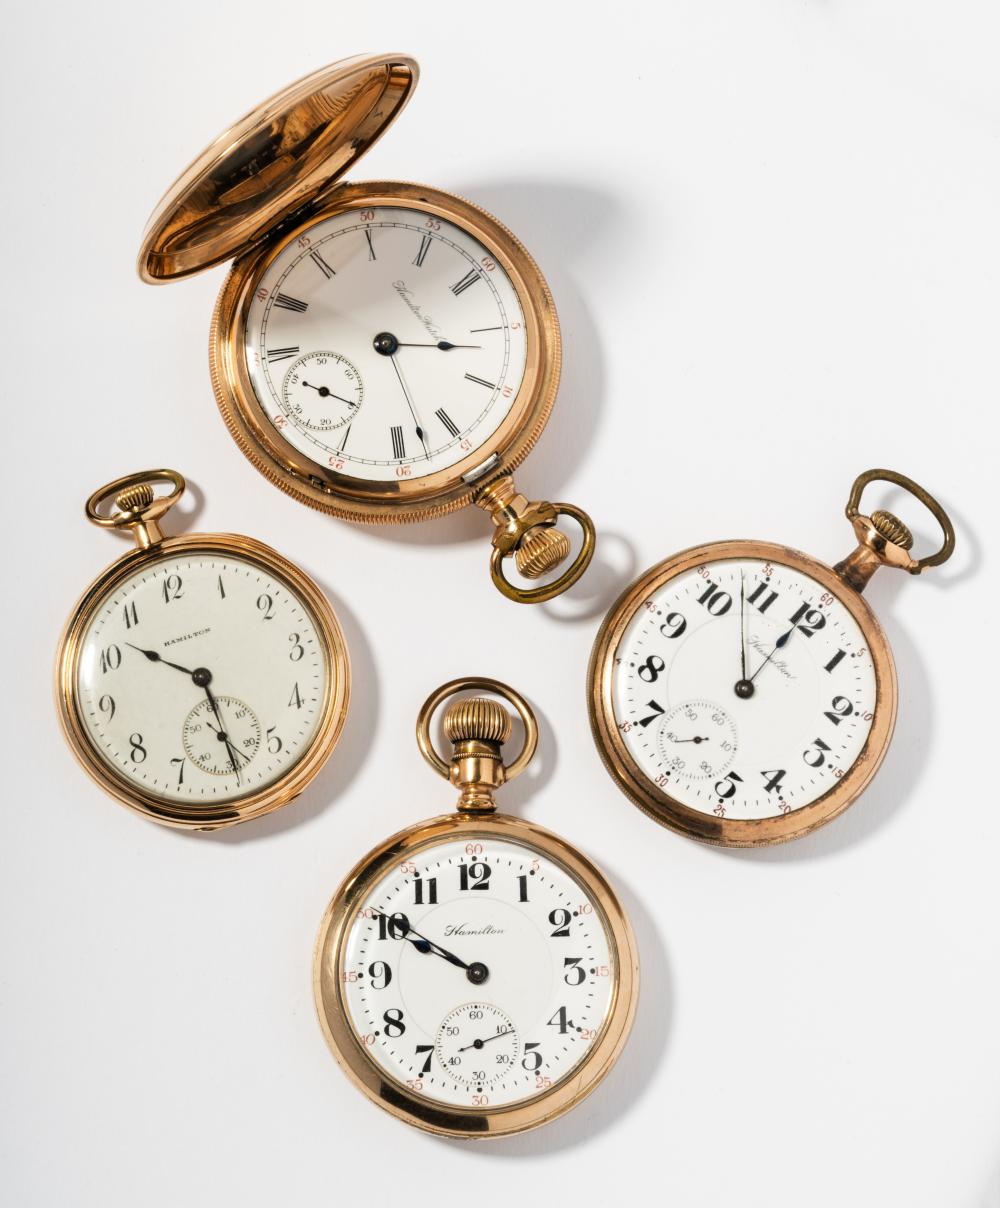 GROUP OF FOUR POCKET WATCHESGroup 3b570f